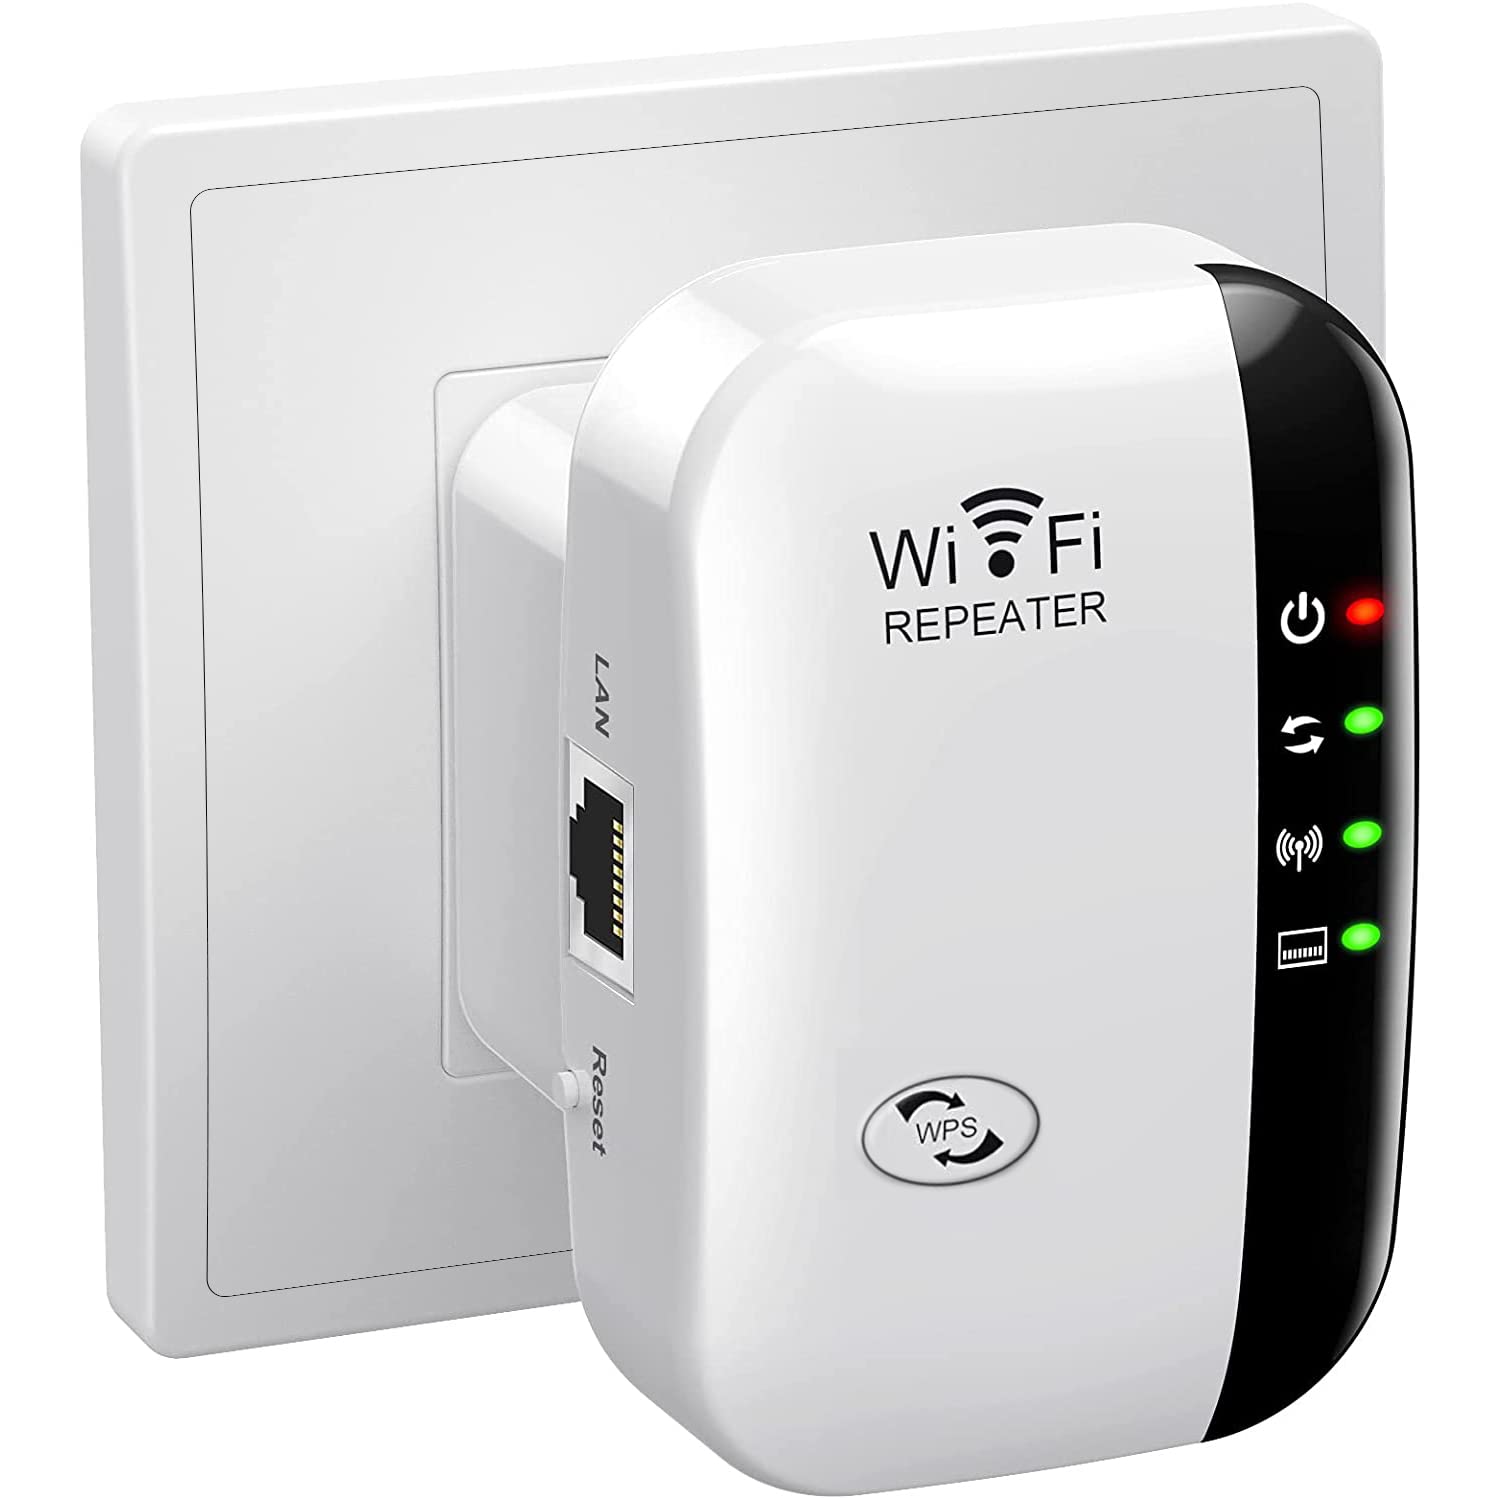 If using Wi-Fi, move closer to the router to improve signal strength.
Restart your router to refresh the connection.